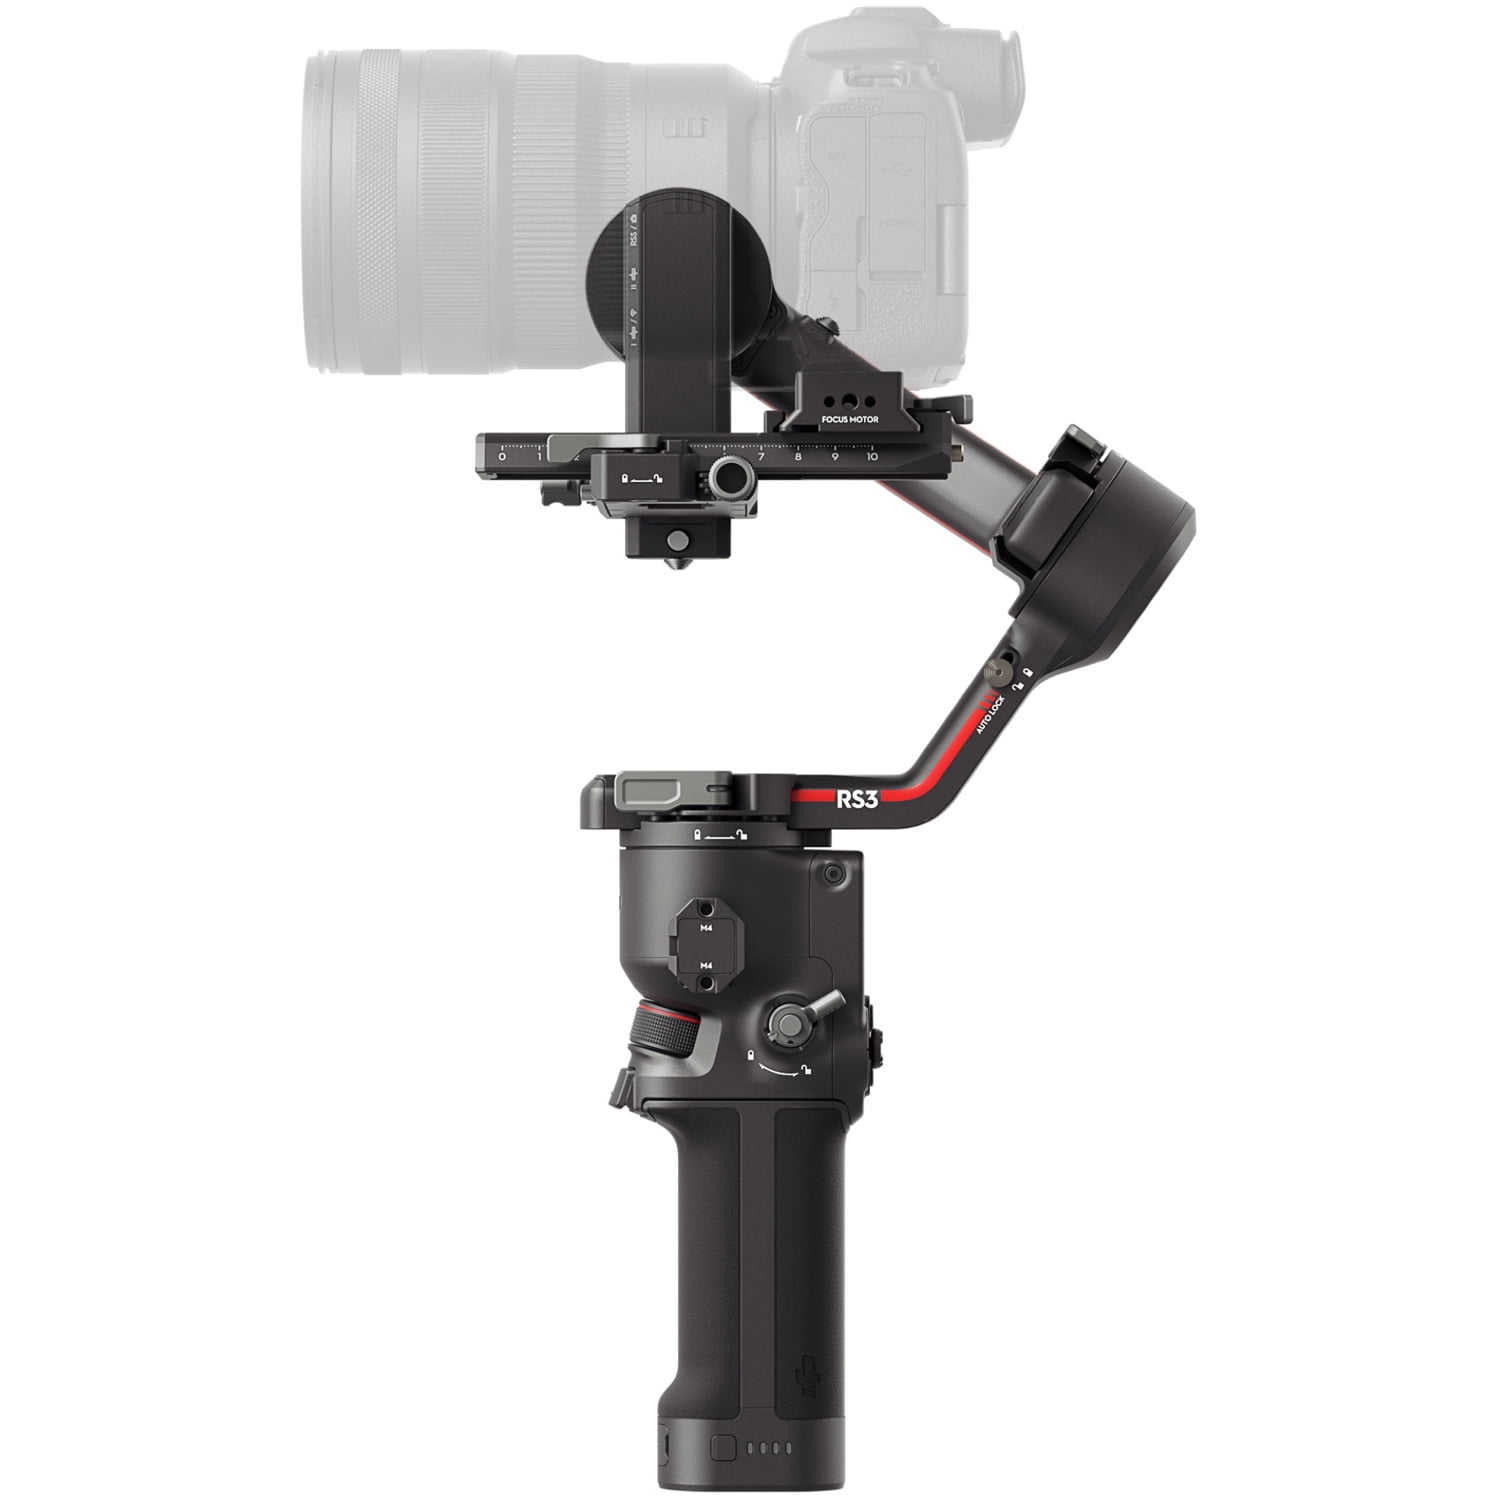 DJI RS 3 Gimbal Stabilizer with BG21 Grip for DSLR and Mirrorless 